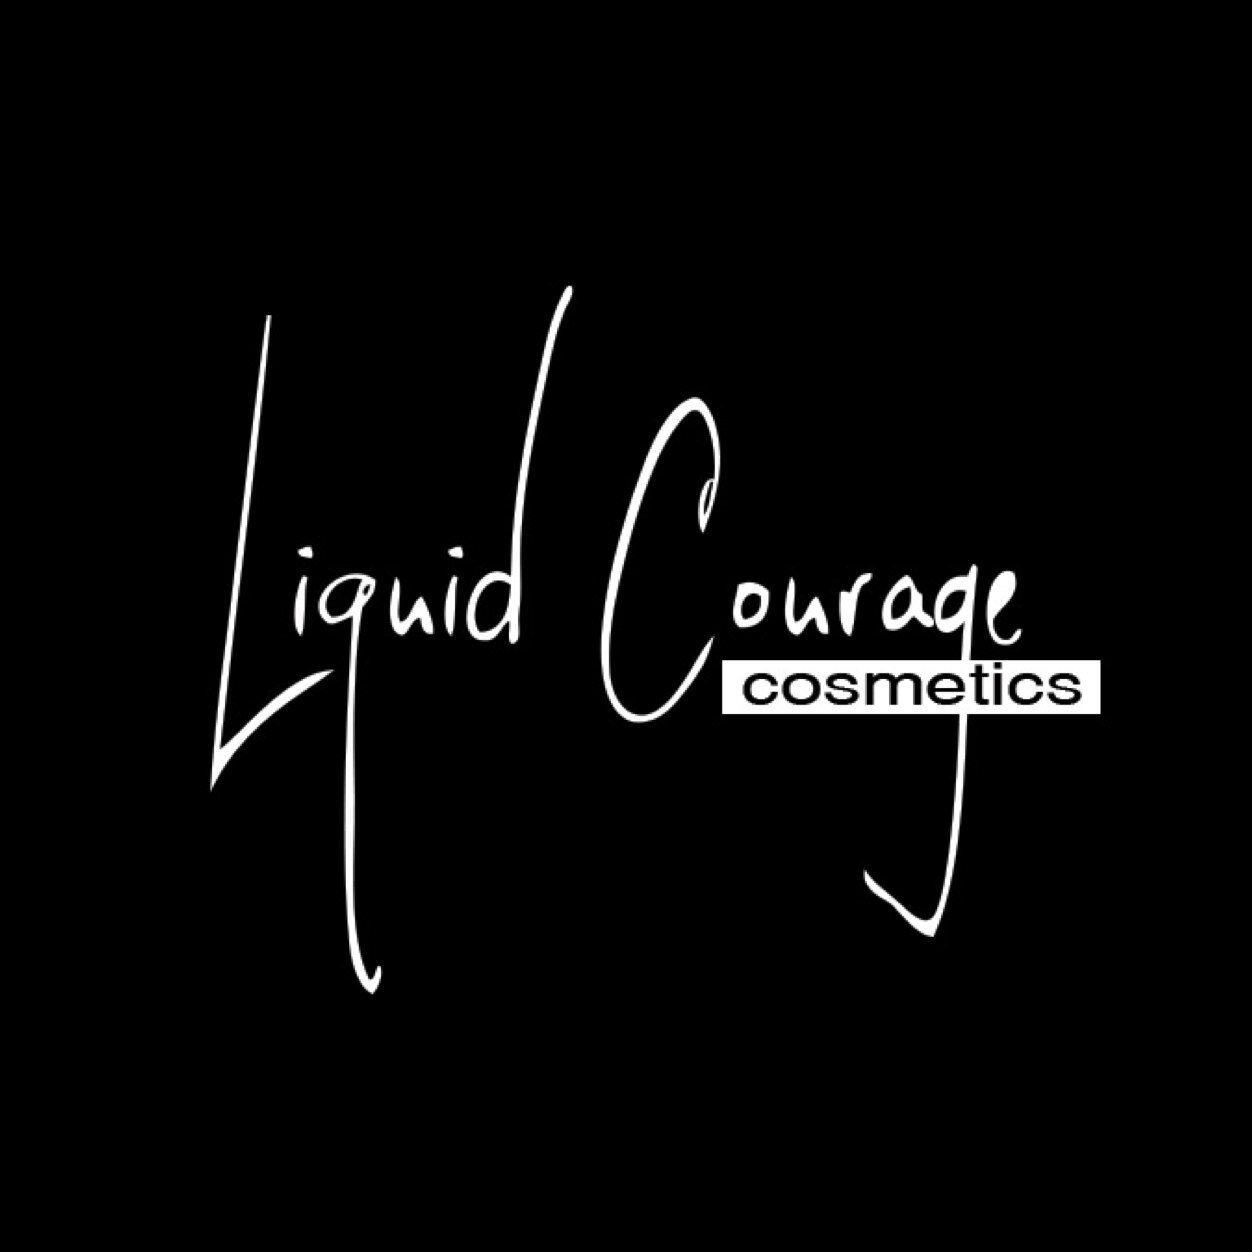 15% Off With Liquid Courage Cosmetics Discount